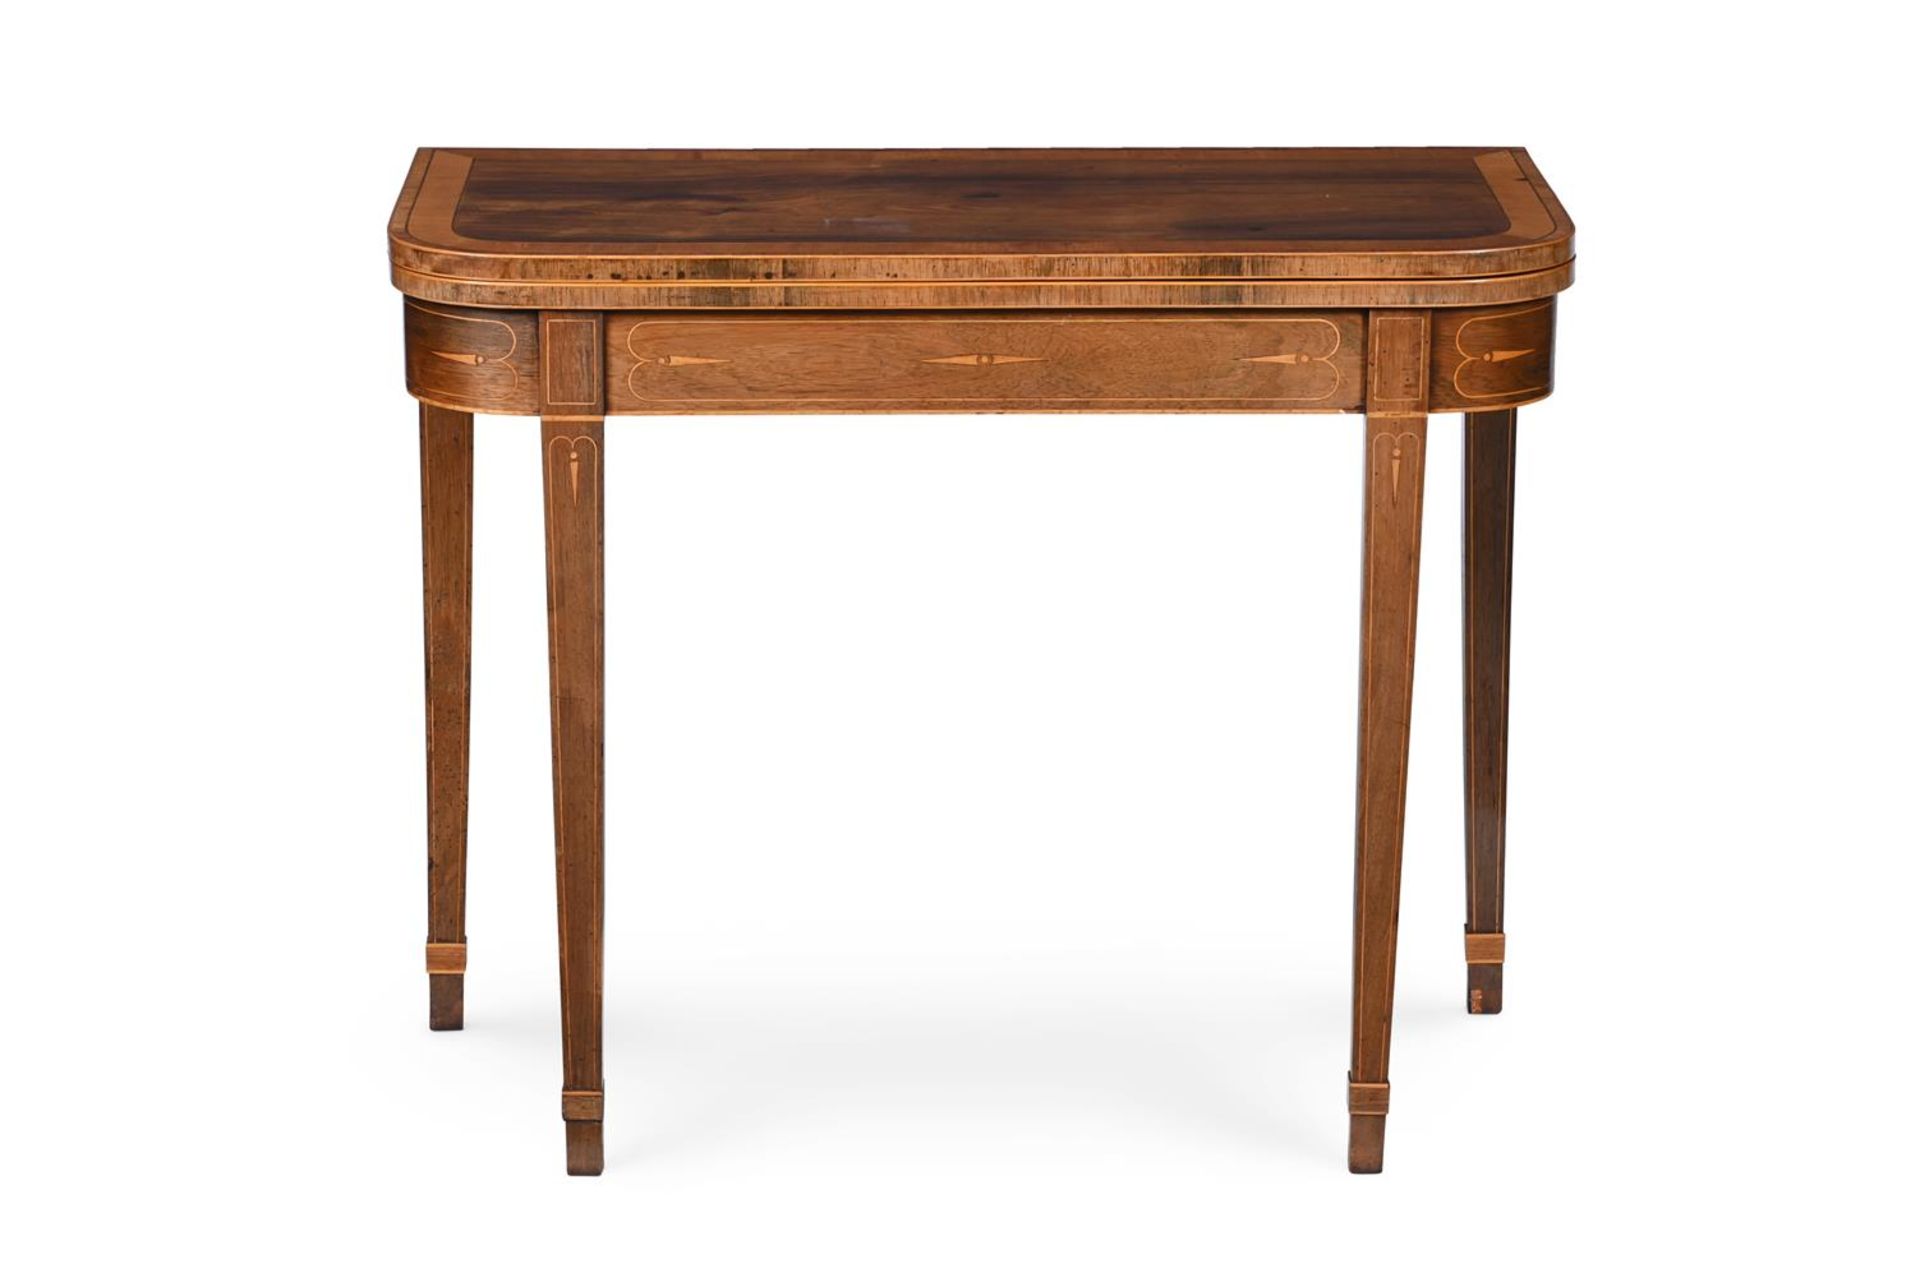 Y A PAIR OF GEORGE III ROSEWOOD AND SATINWOOD CROSSBANDED CARD TABLES, CIRCA 1790 - Image 4 of 8